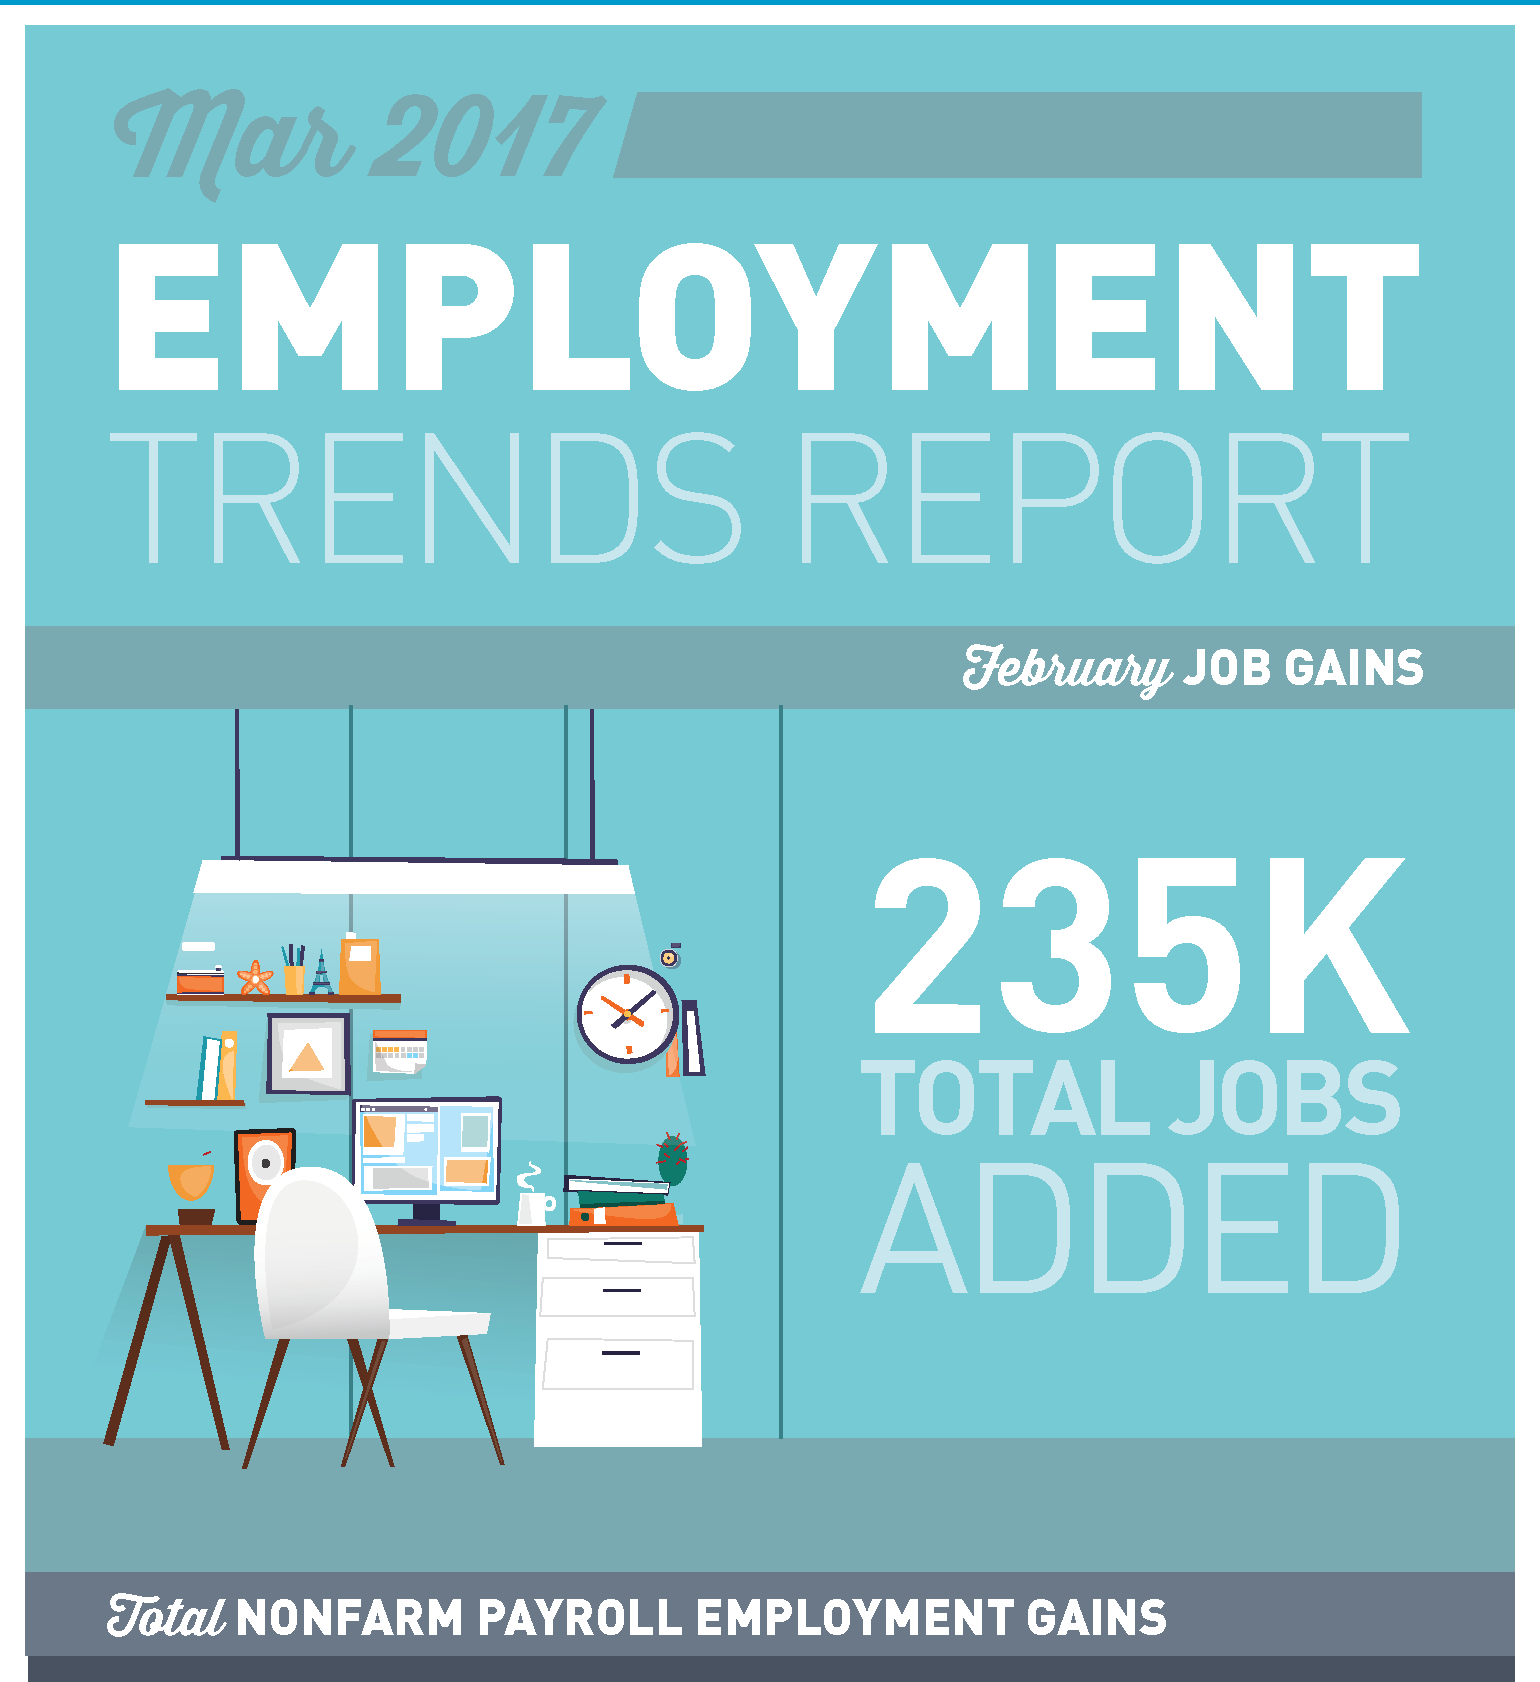 Employment trends. Lose your job gain. Trend report